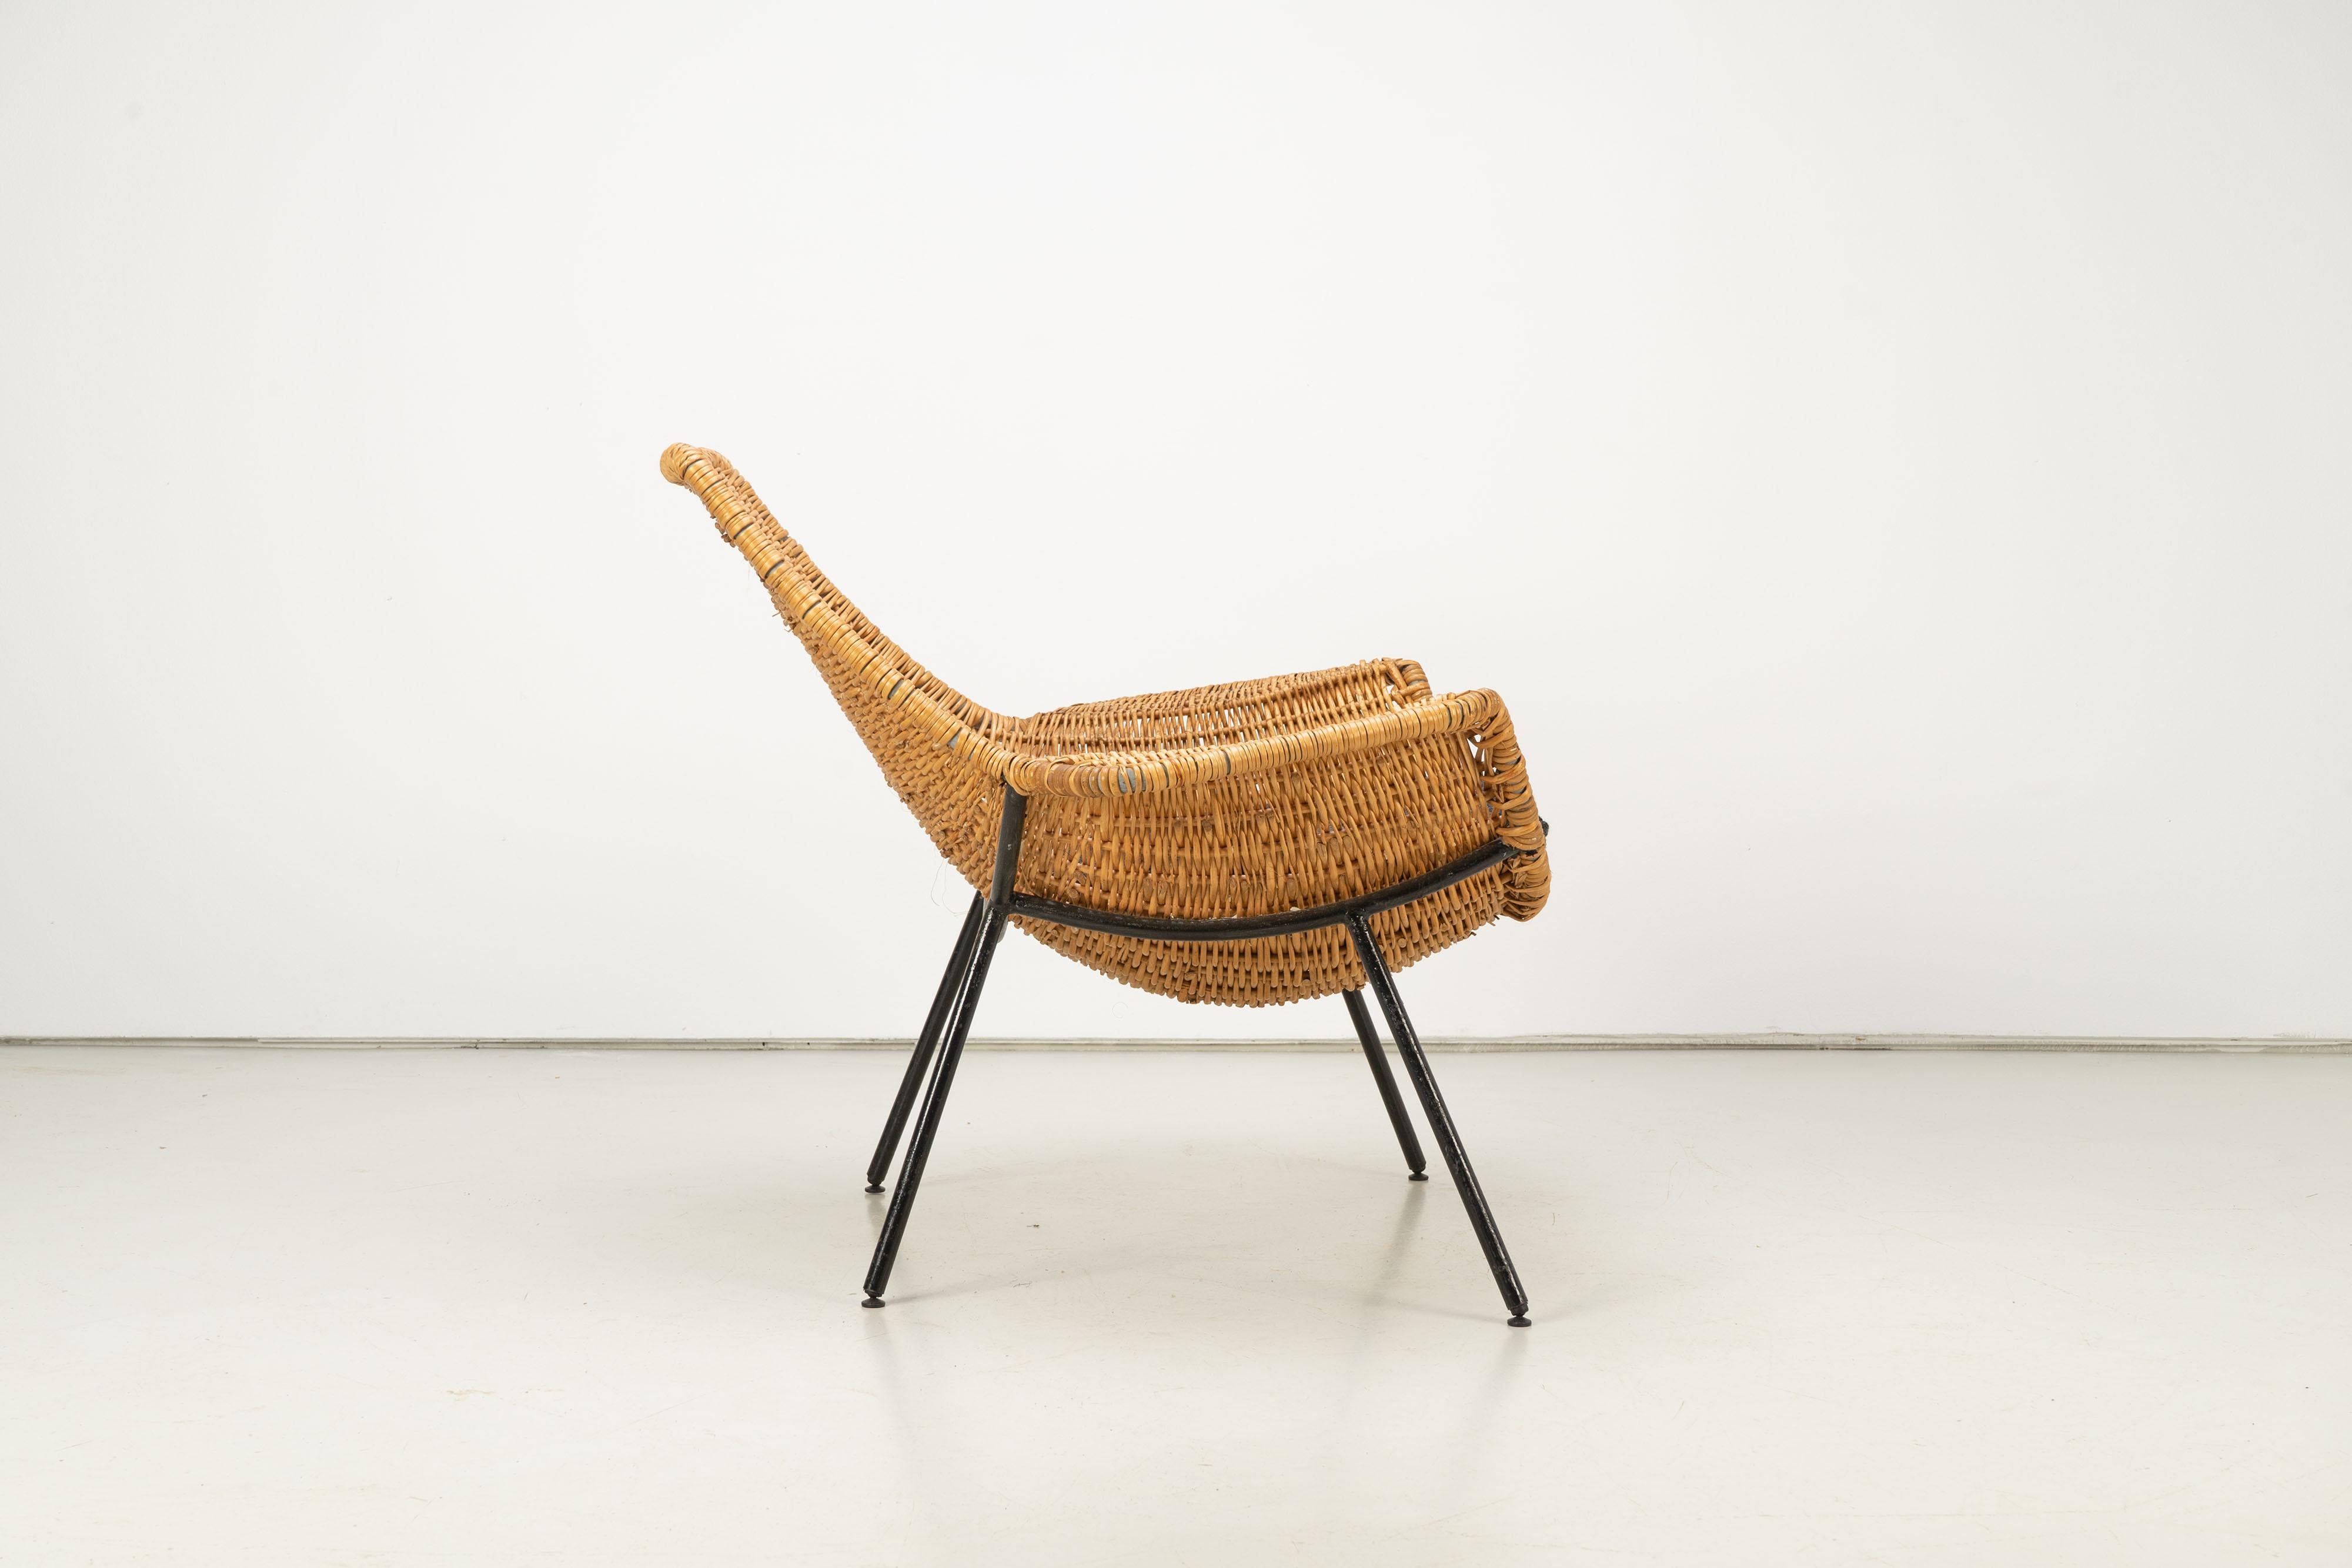 20th Century Mid-Century Modern Rattan Lounge Chair by Giancarlo De Carlo Italy, 1954 For Sale